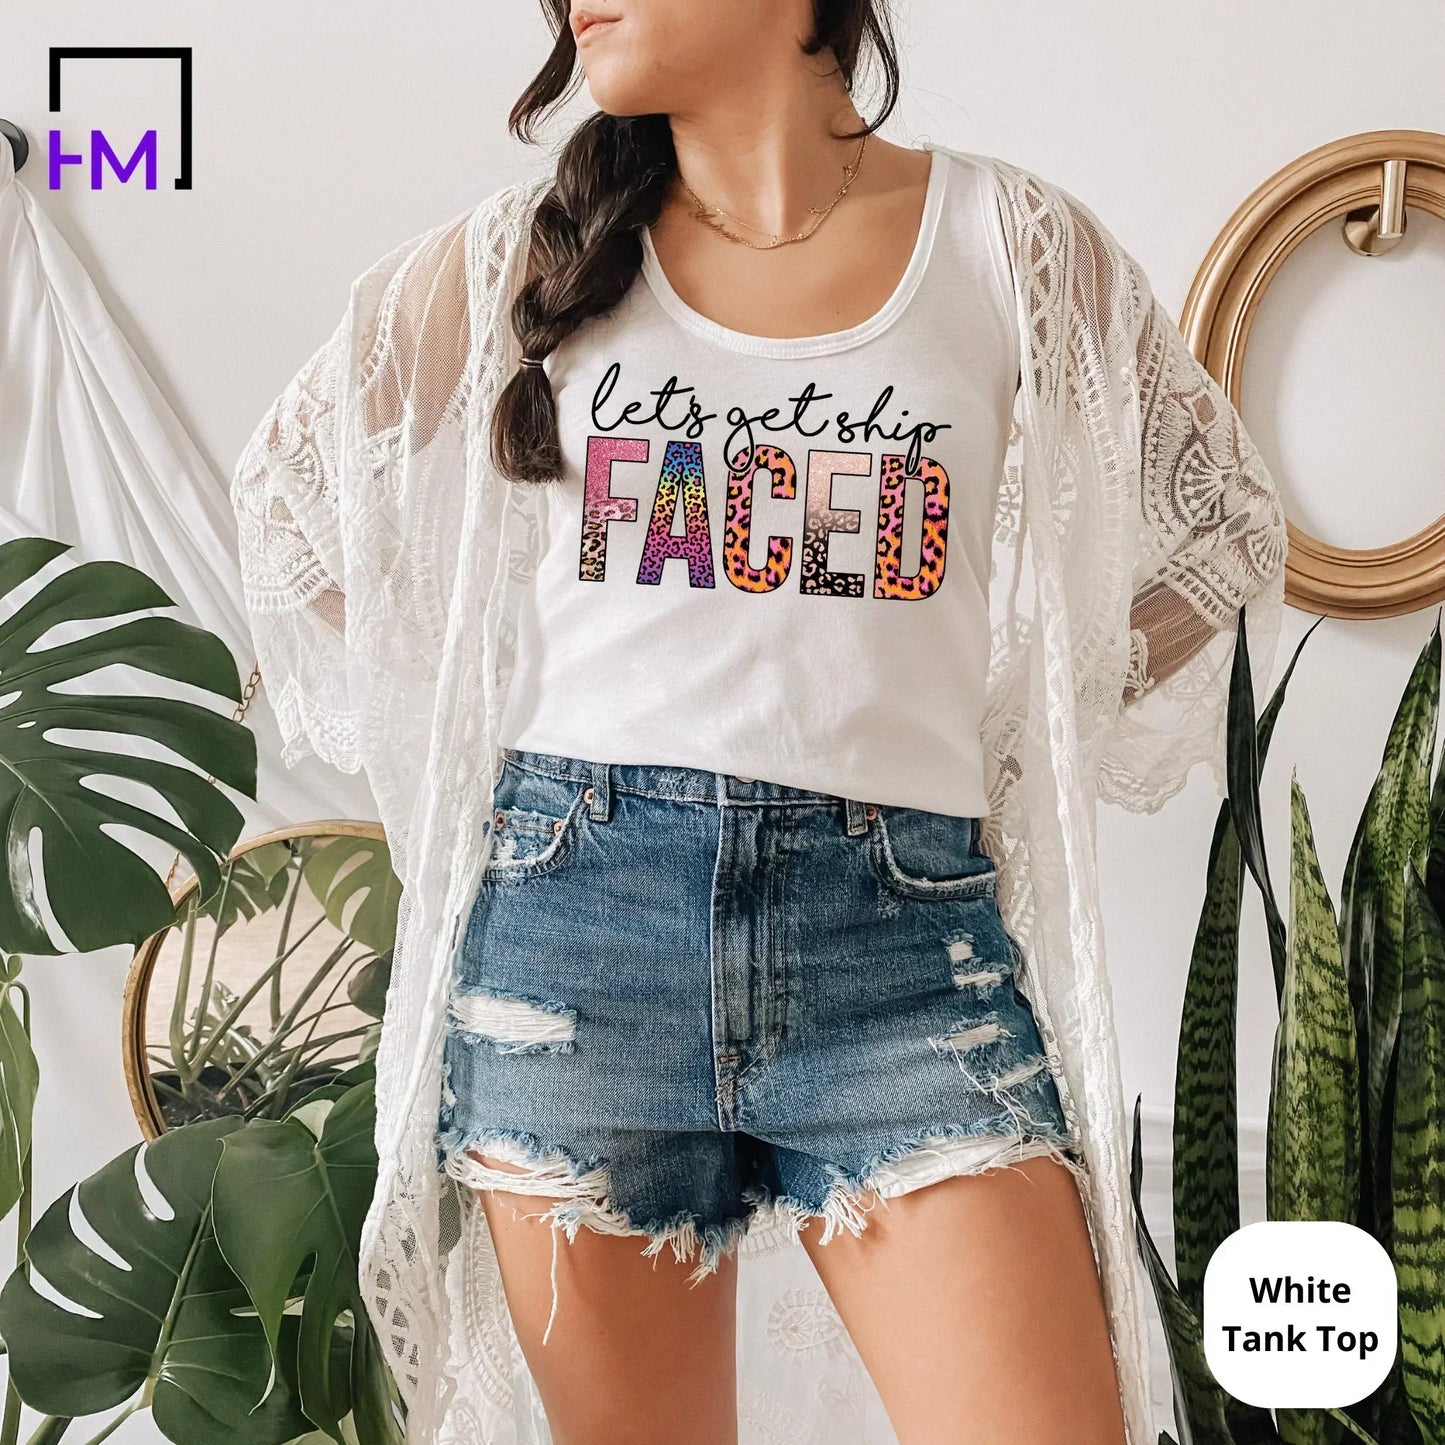 Let's Get Ship Faced, Funny Cruise Shirts for Women HMDesignStudioUS